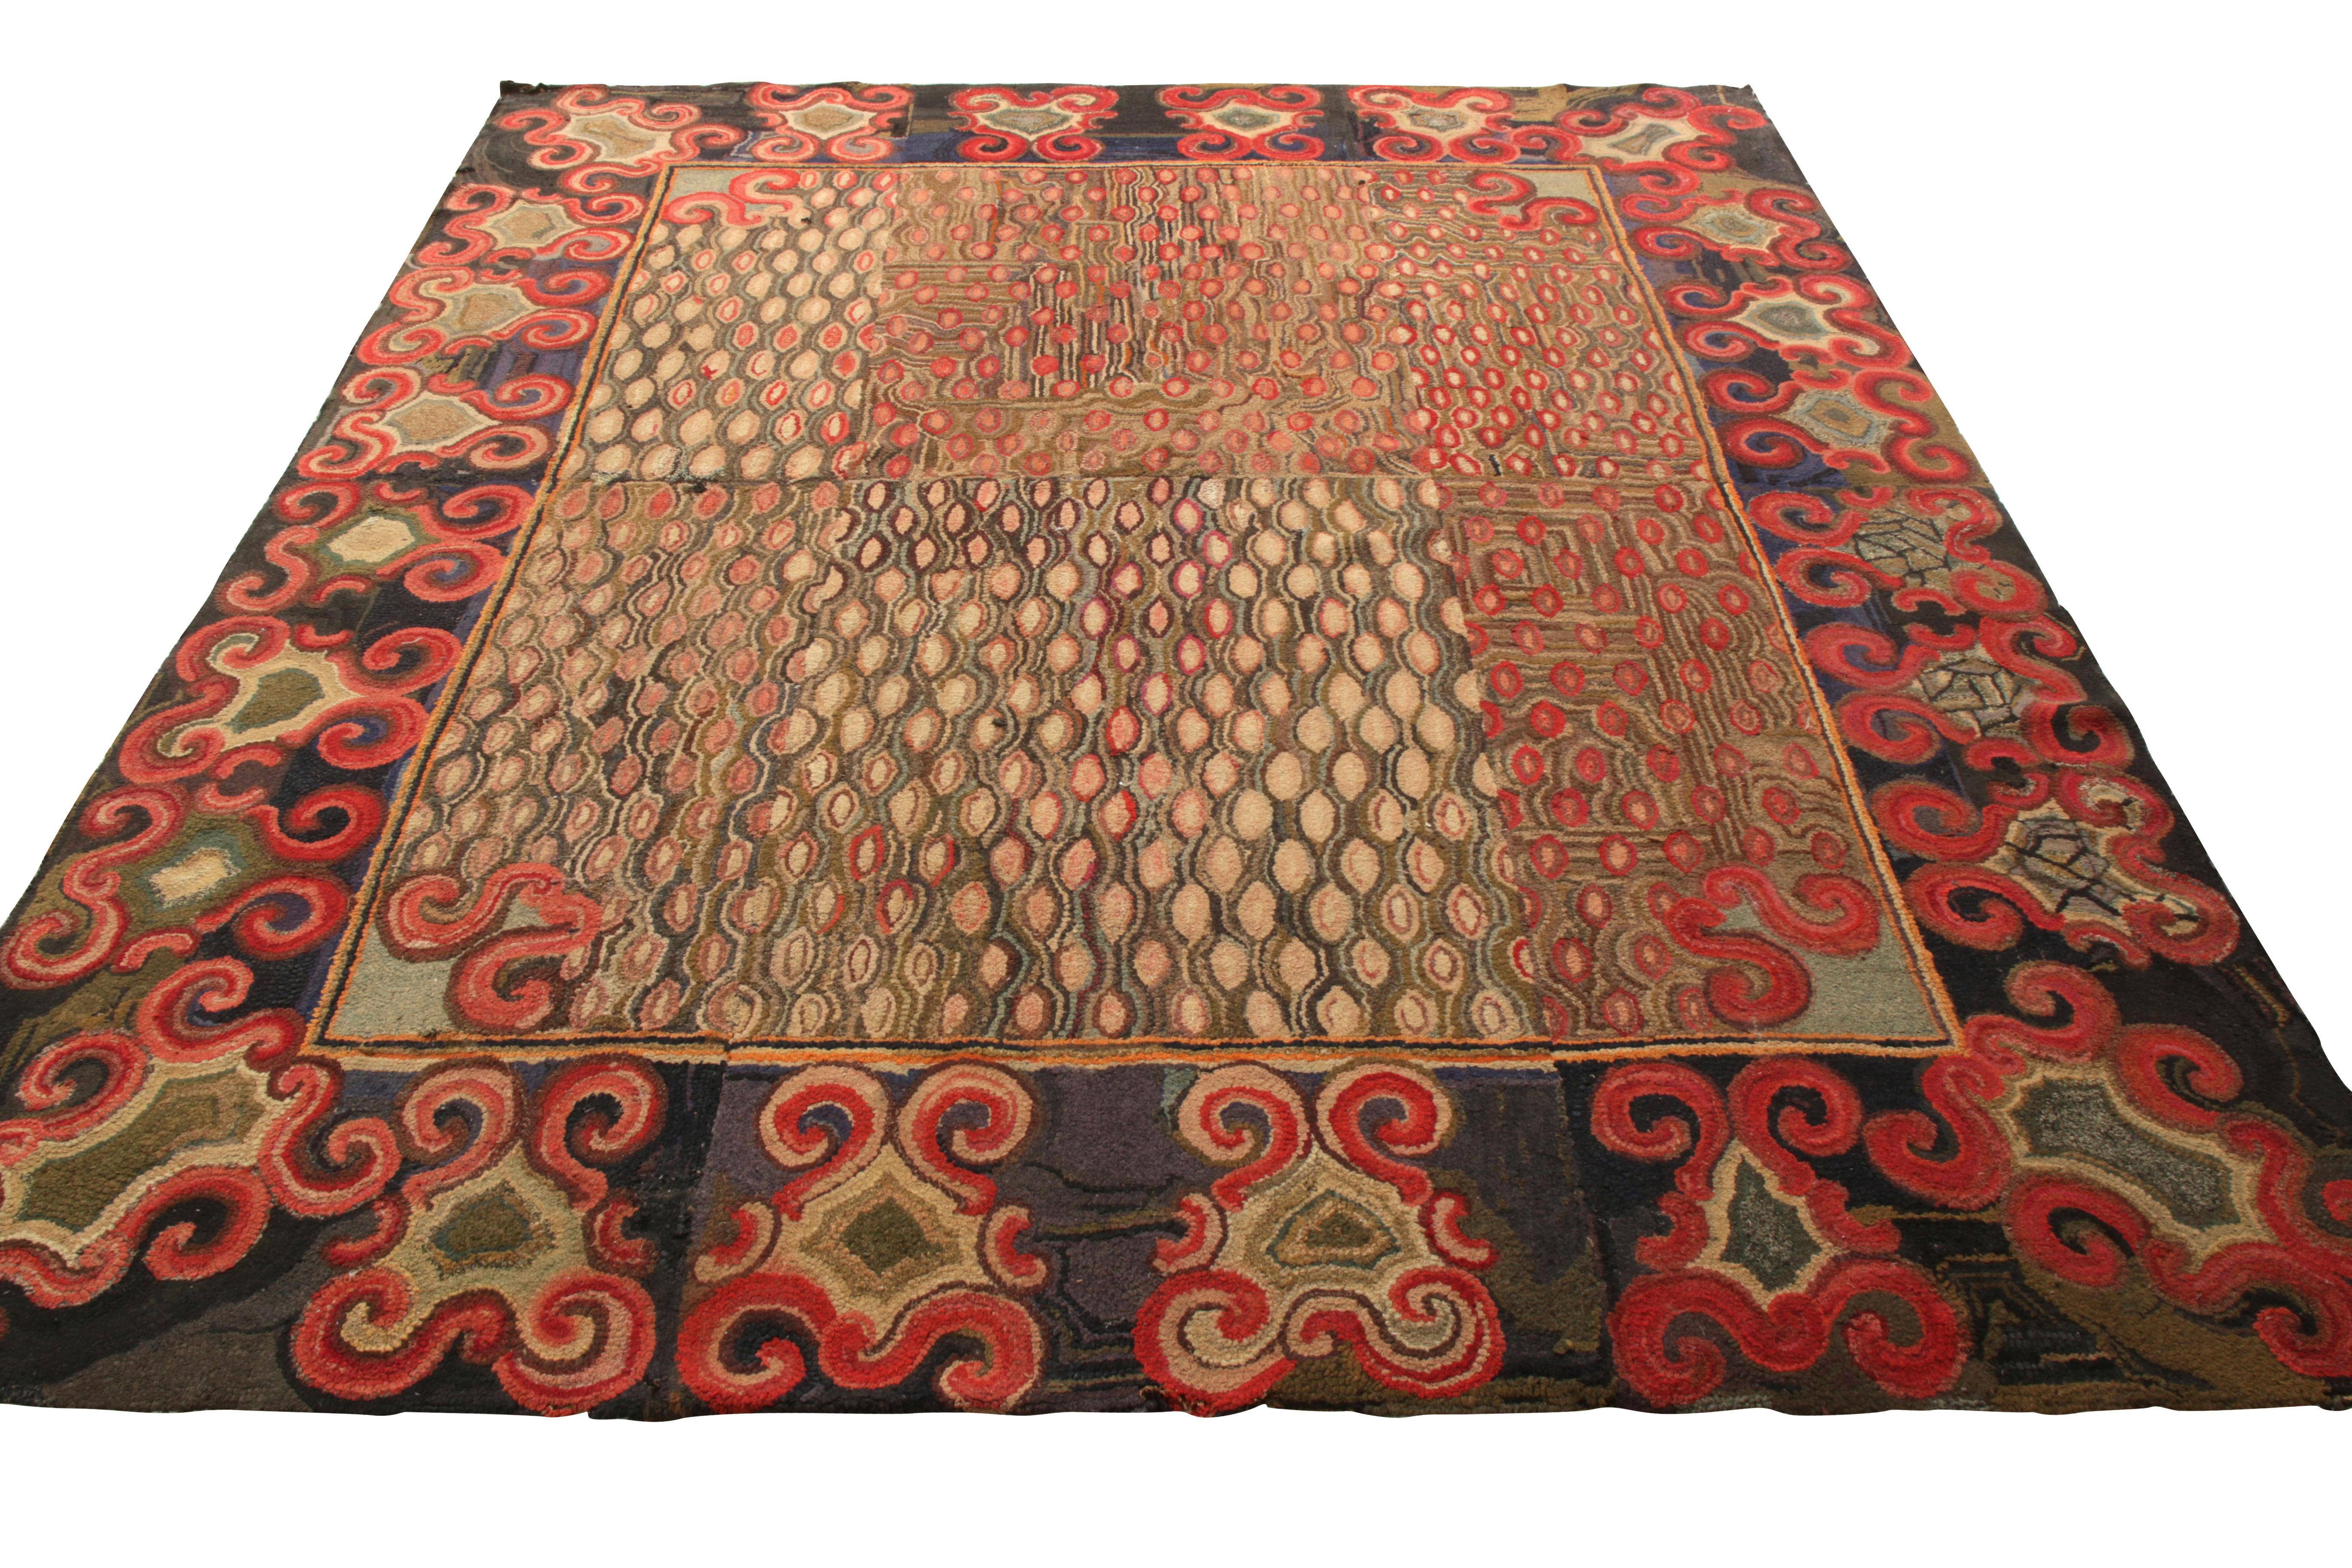 Hand hooked in wool, this very unique rug makes way to Rug & Kilim’s Antique and Vintage collection. Originating from the United States circa 1910-1920, this visually arresting 8 x 12 enjoys a unison of intricate geometric floral design with a bold